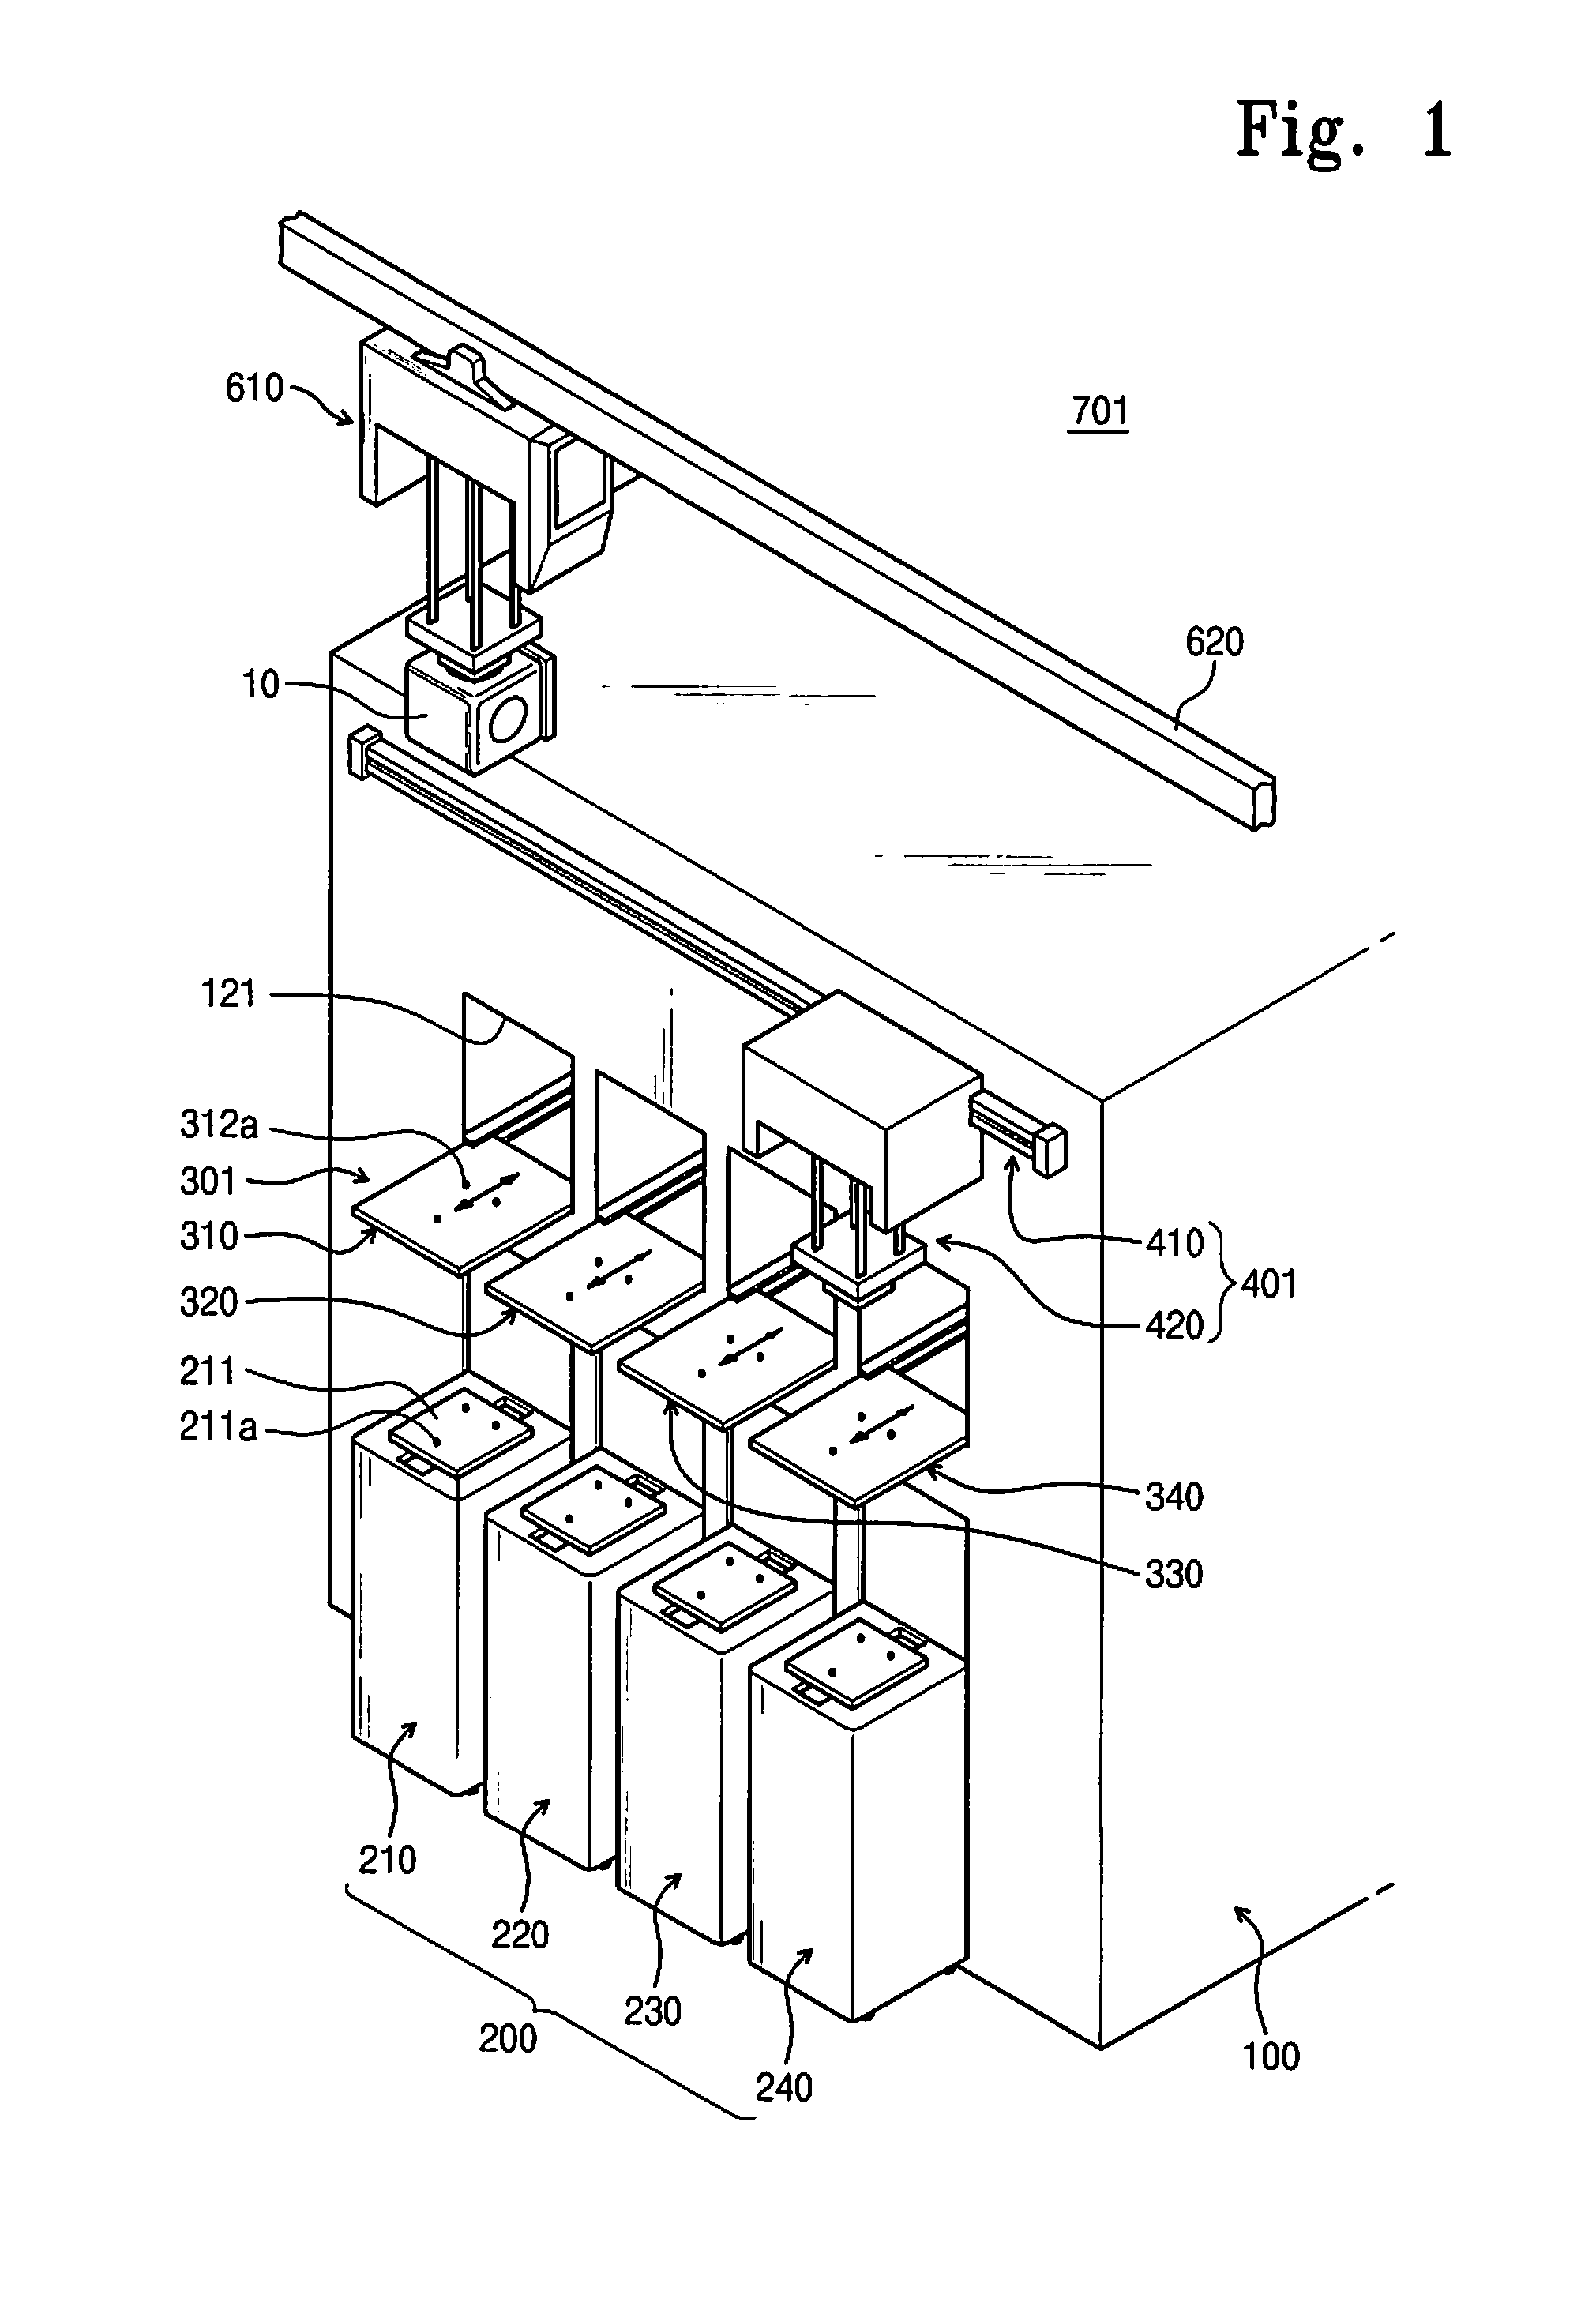 Substrate processing apparatus and method for transferring substrate for the apparatus